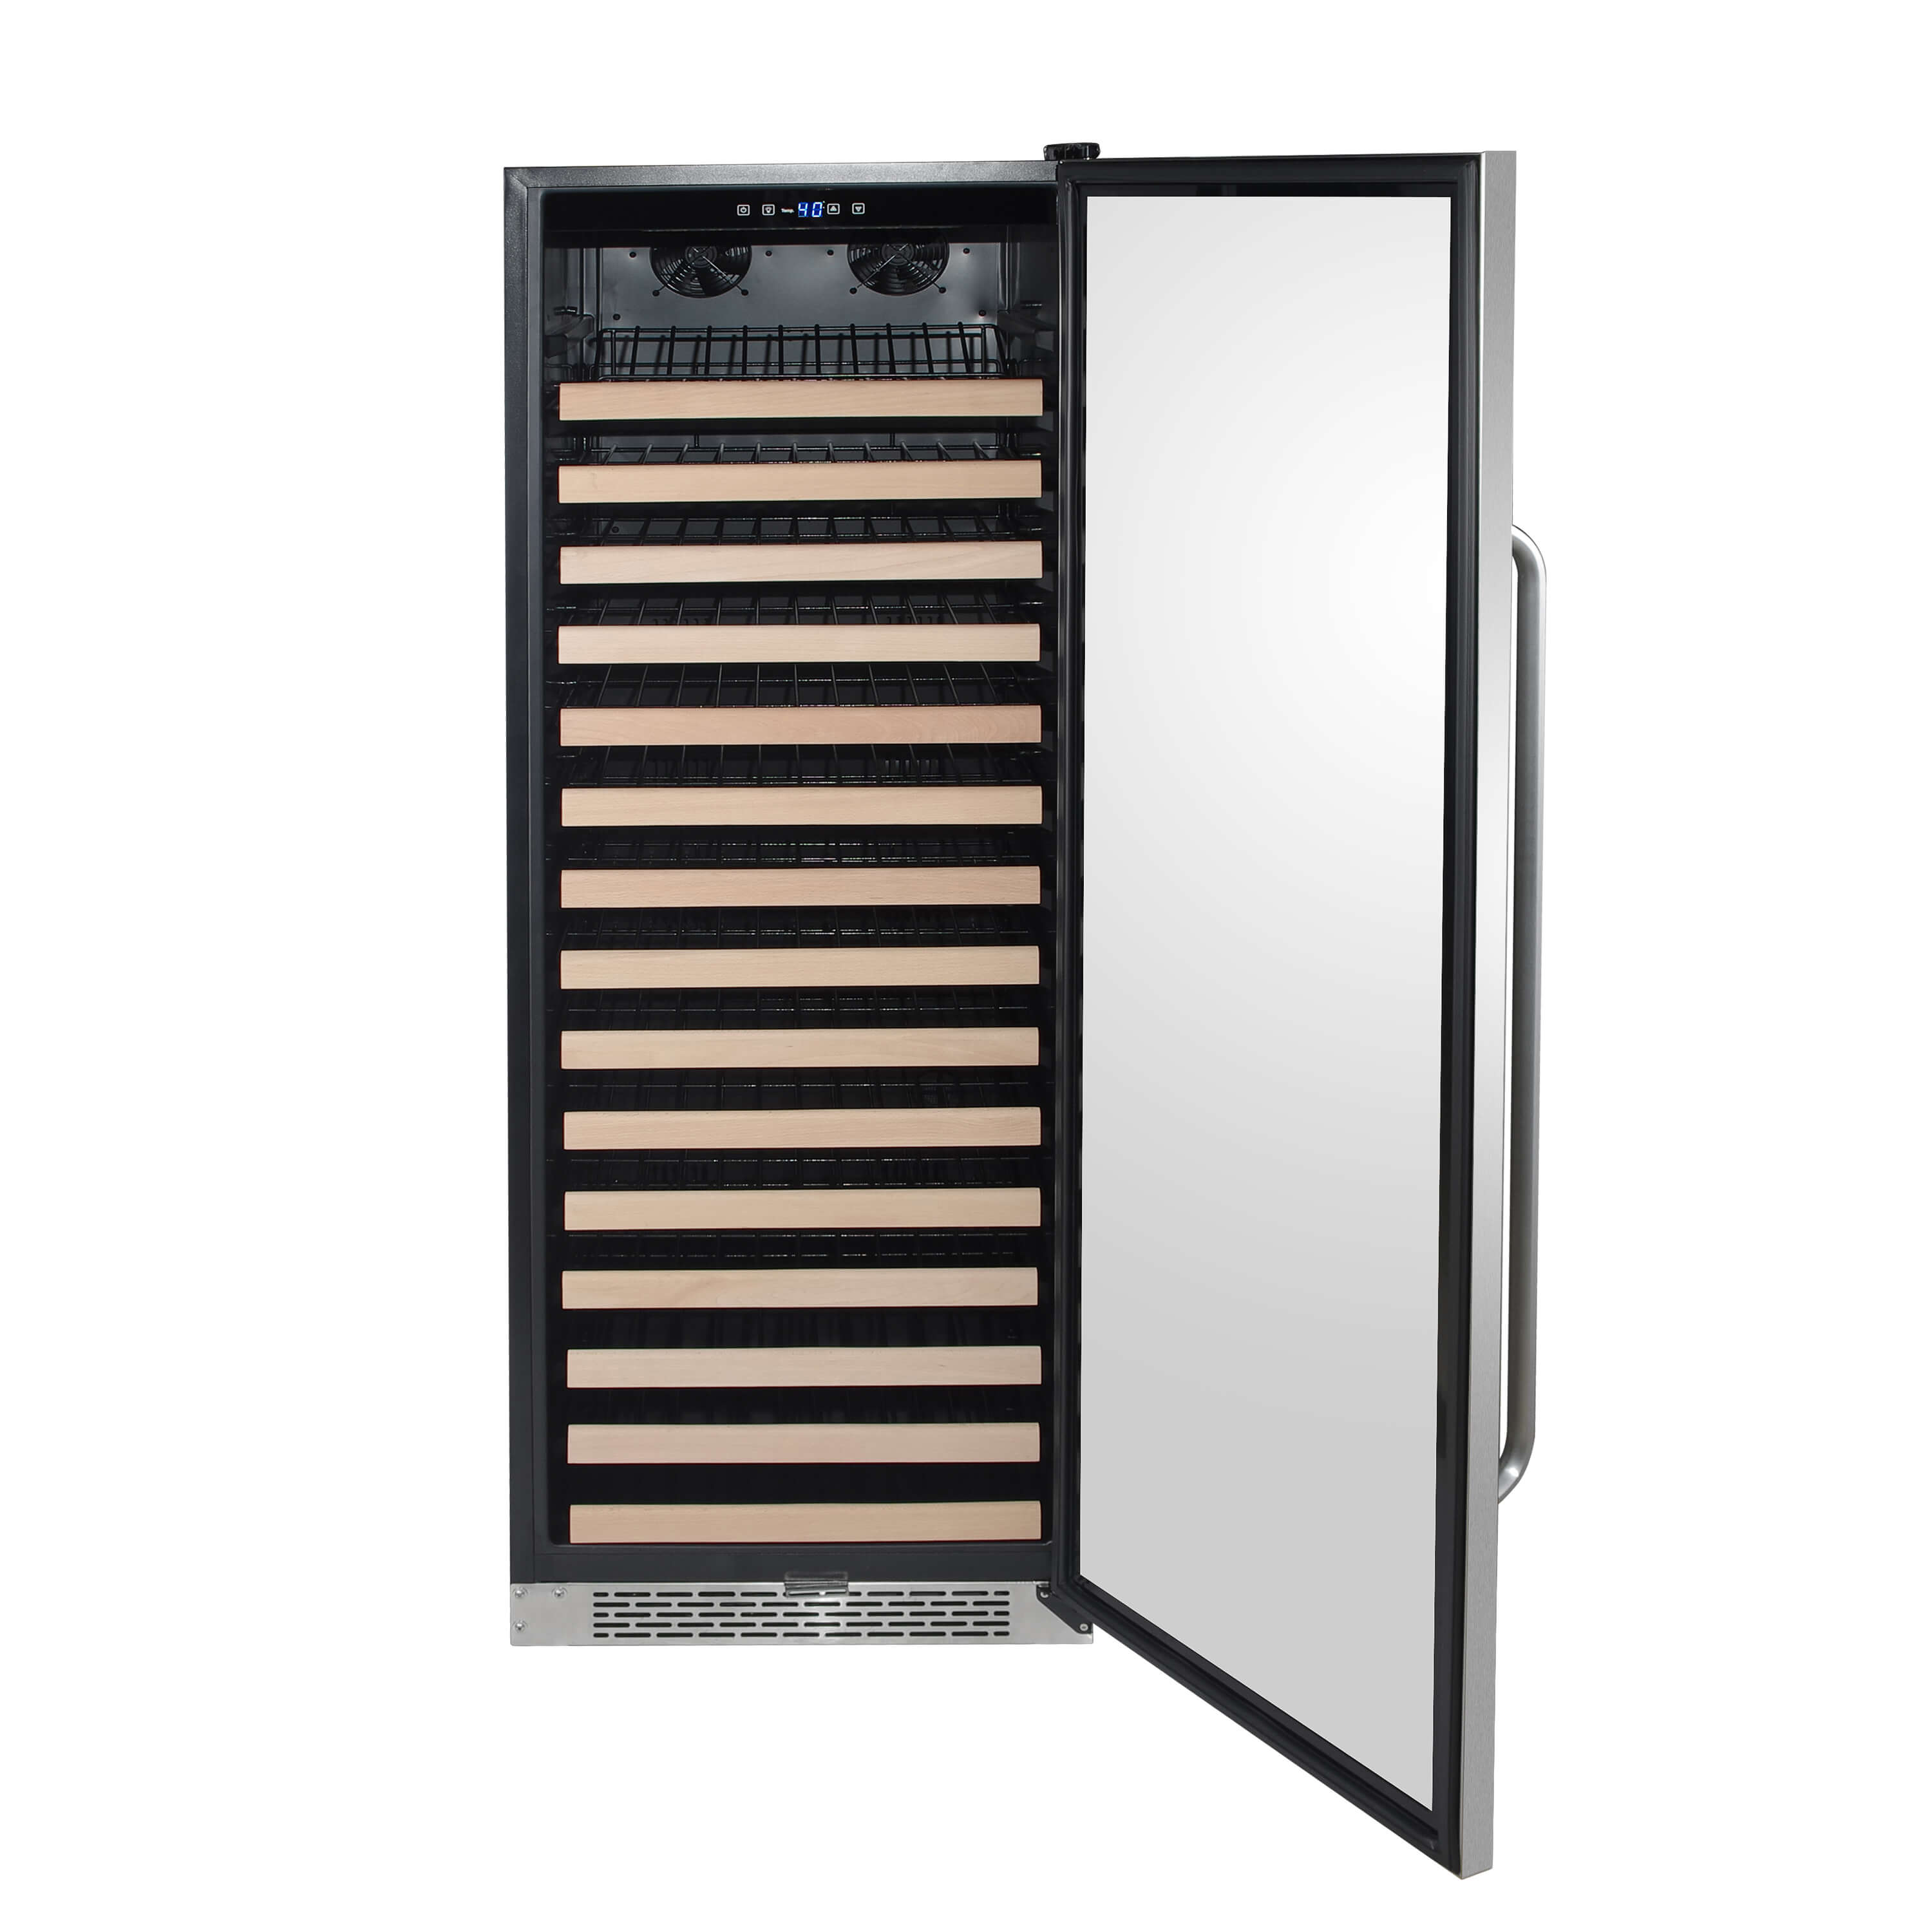 Whynter - 24" 166-Bottle Single-Zone Built-in Stainless Steel Wine Cooler (BWR-1662SD)